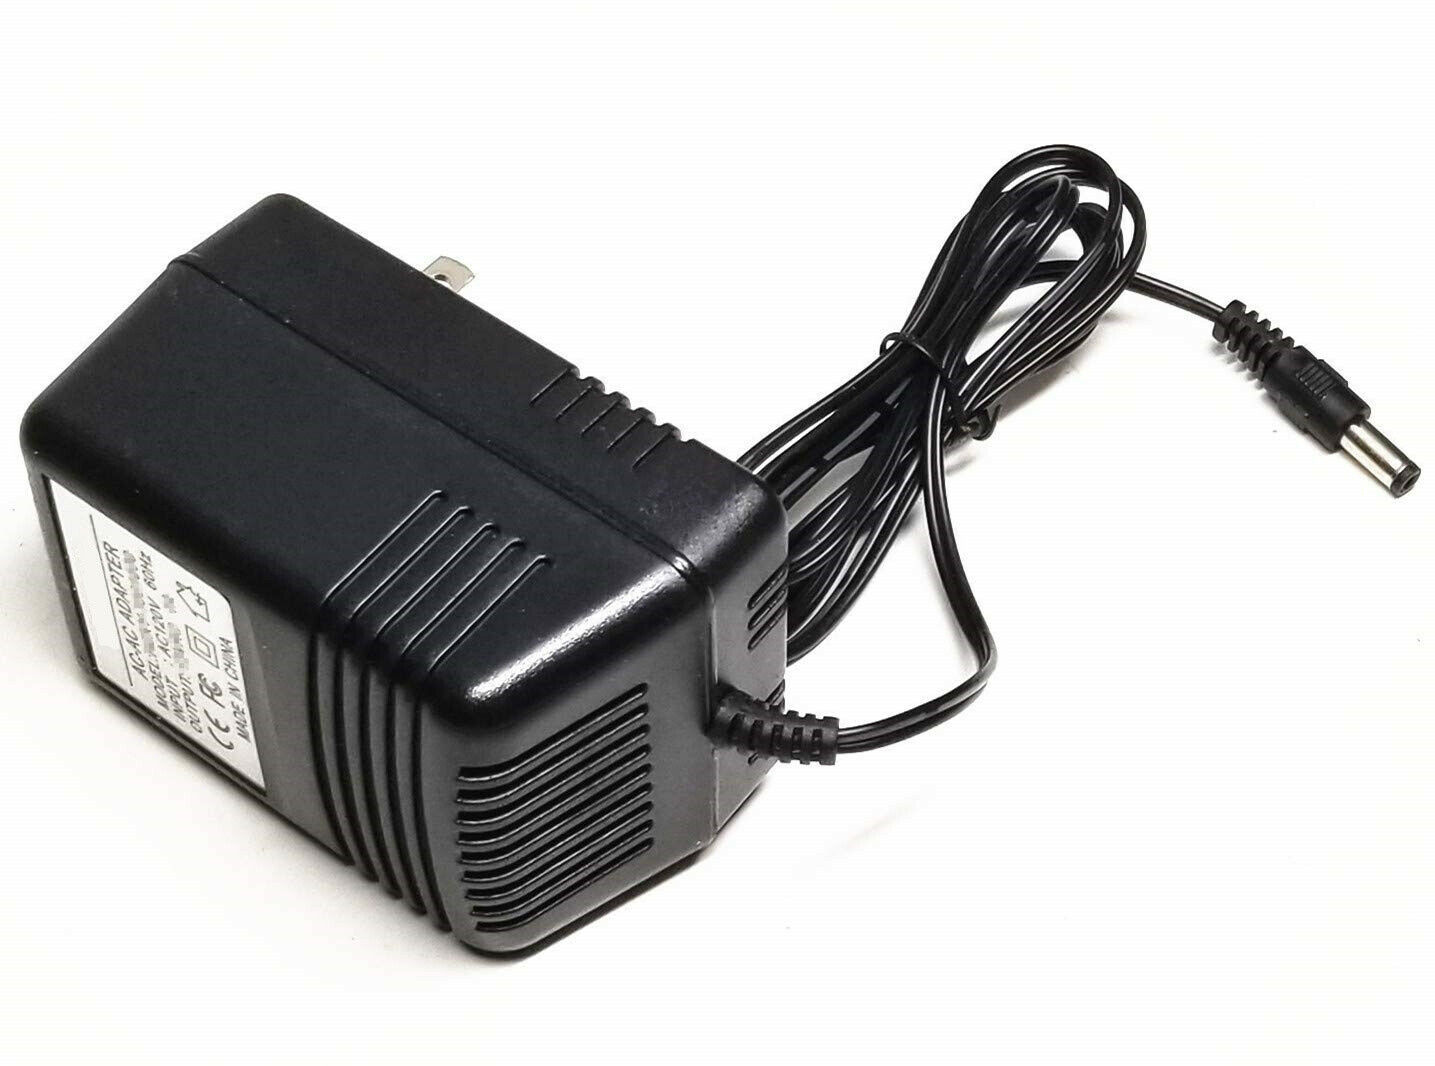 For LG BPM33 Blu-ray DVD Player AC/DC Adapter Power Supply Charger Cord Cable 100% Brand New, High Quality AC